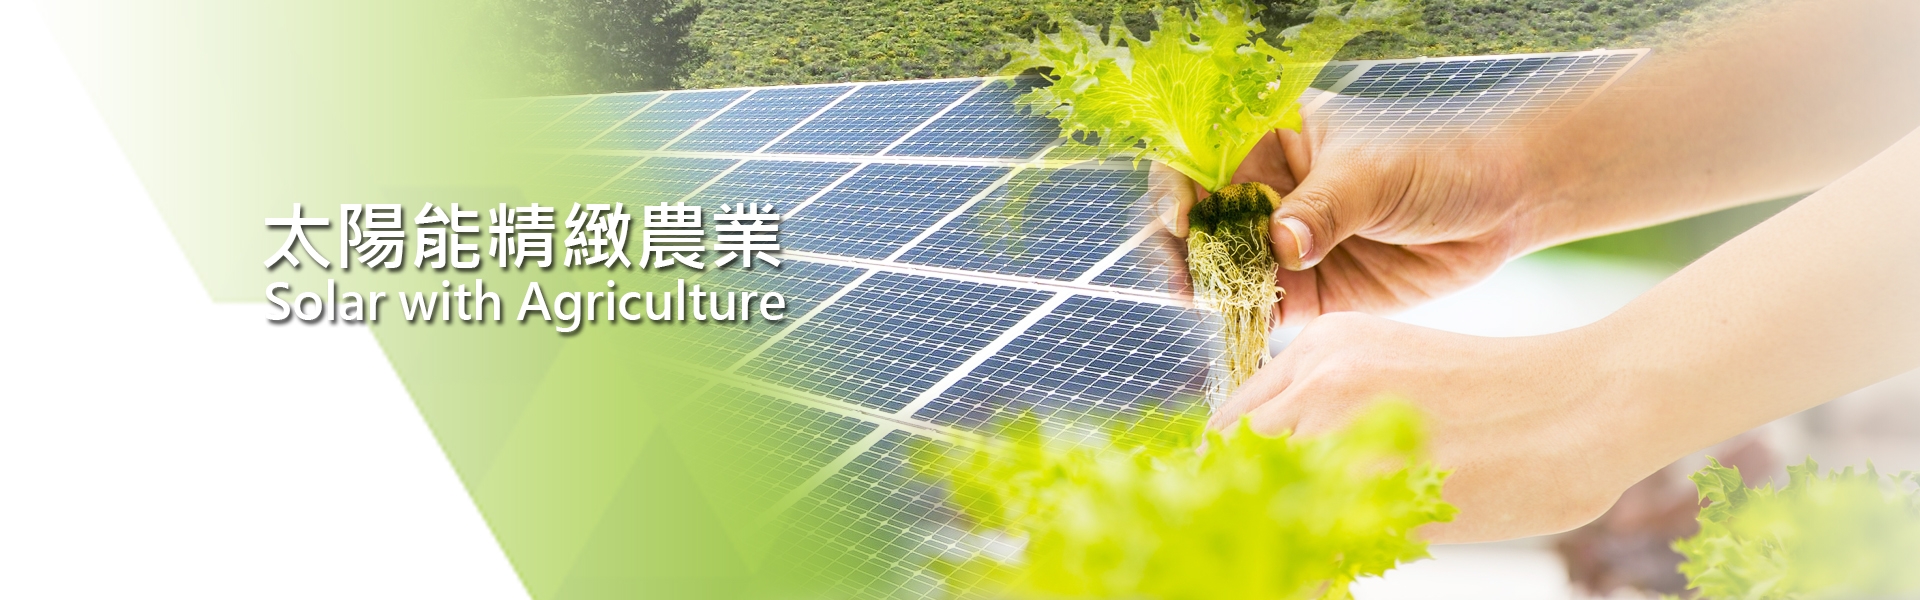 Solar with Agriculture